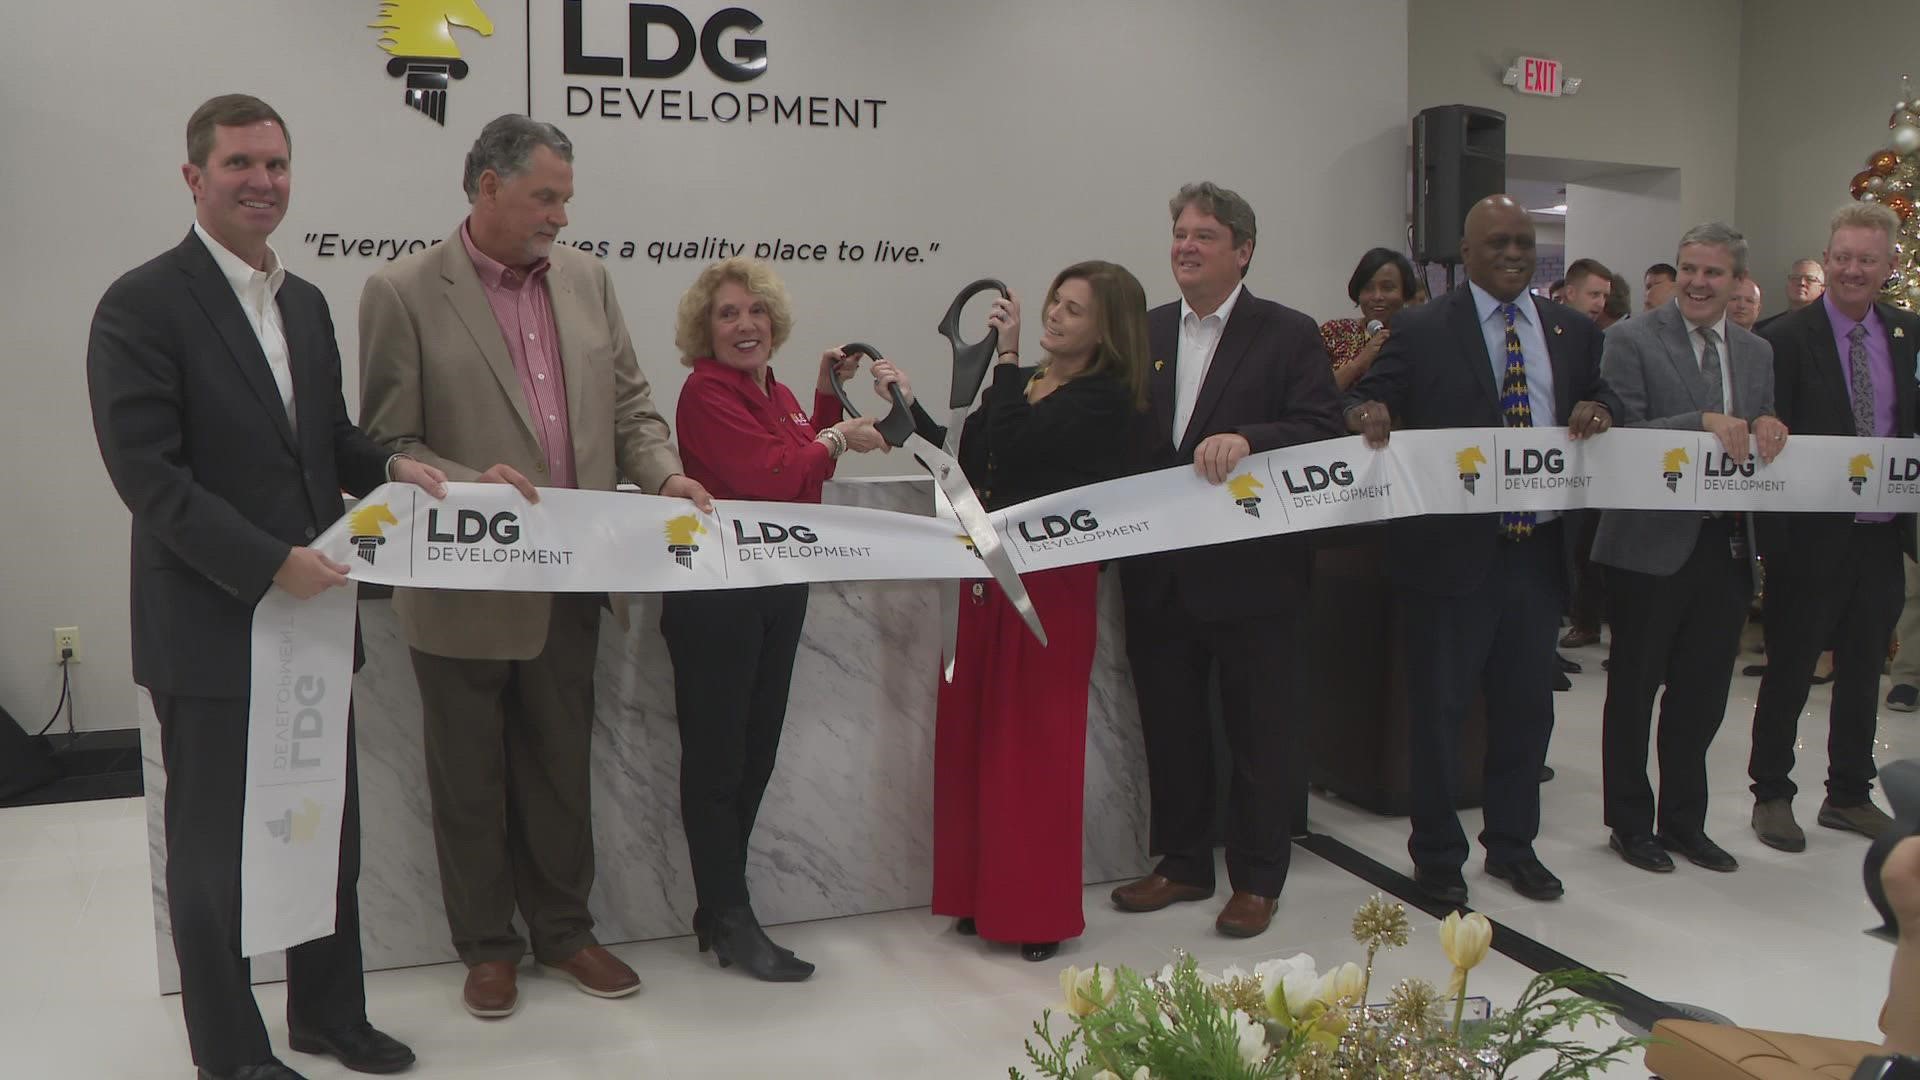 LDG spent nearly $11 million on the company's new headquarters. The investment will create 50 high-wage jobs for Kentuckians at LDG.